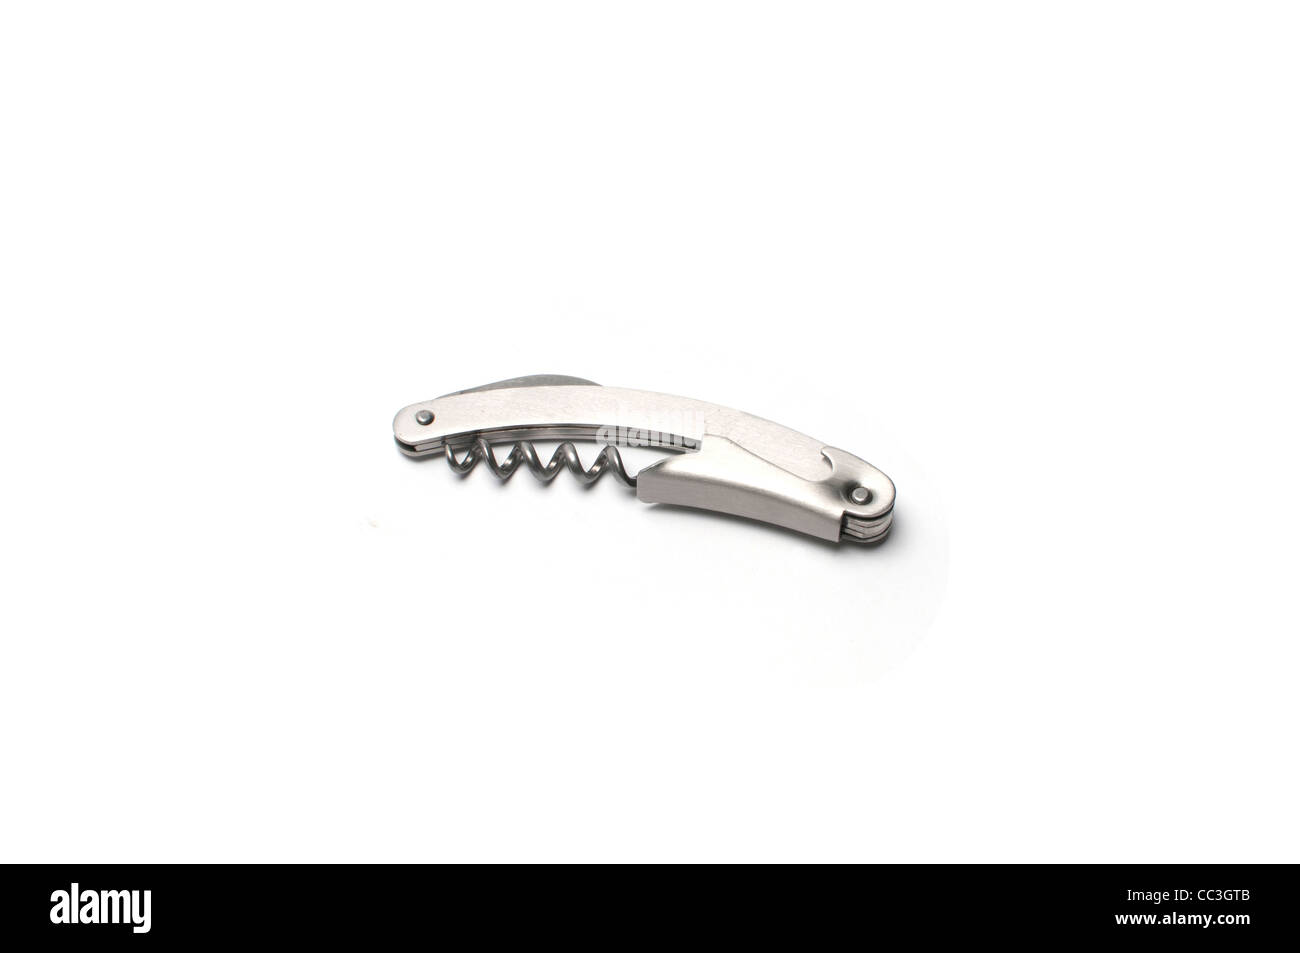 A bottle opener and corkscrew Stock Photo